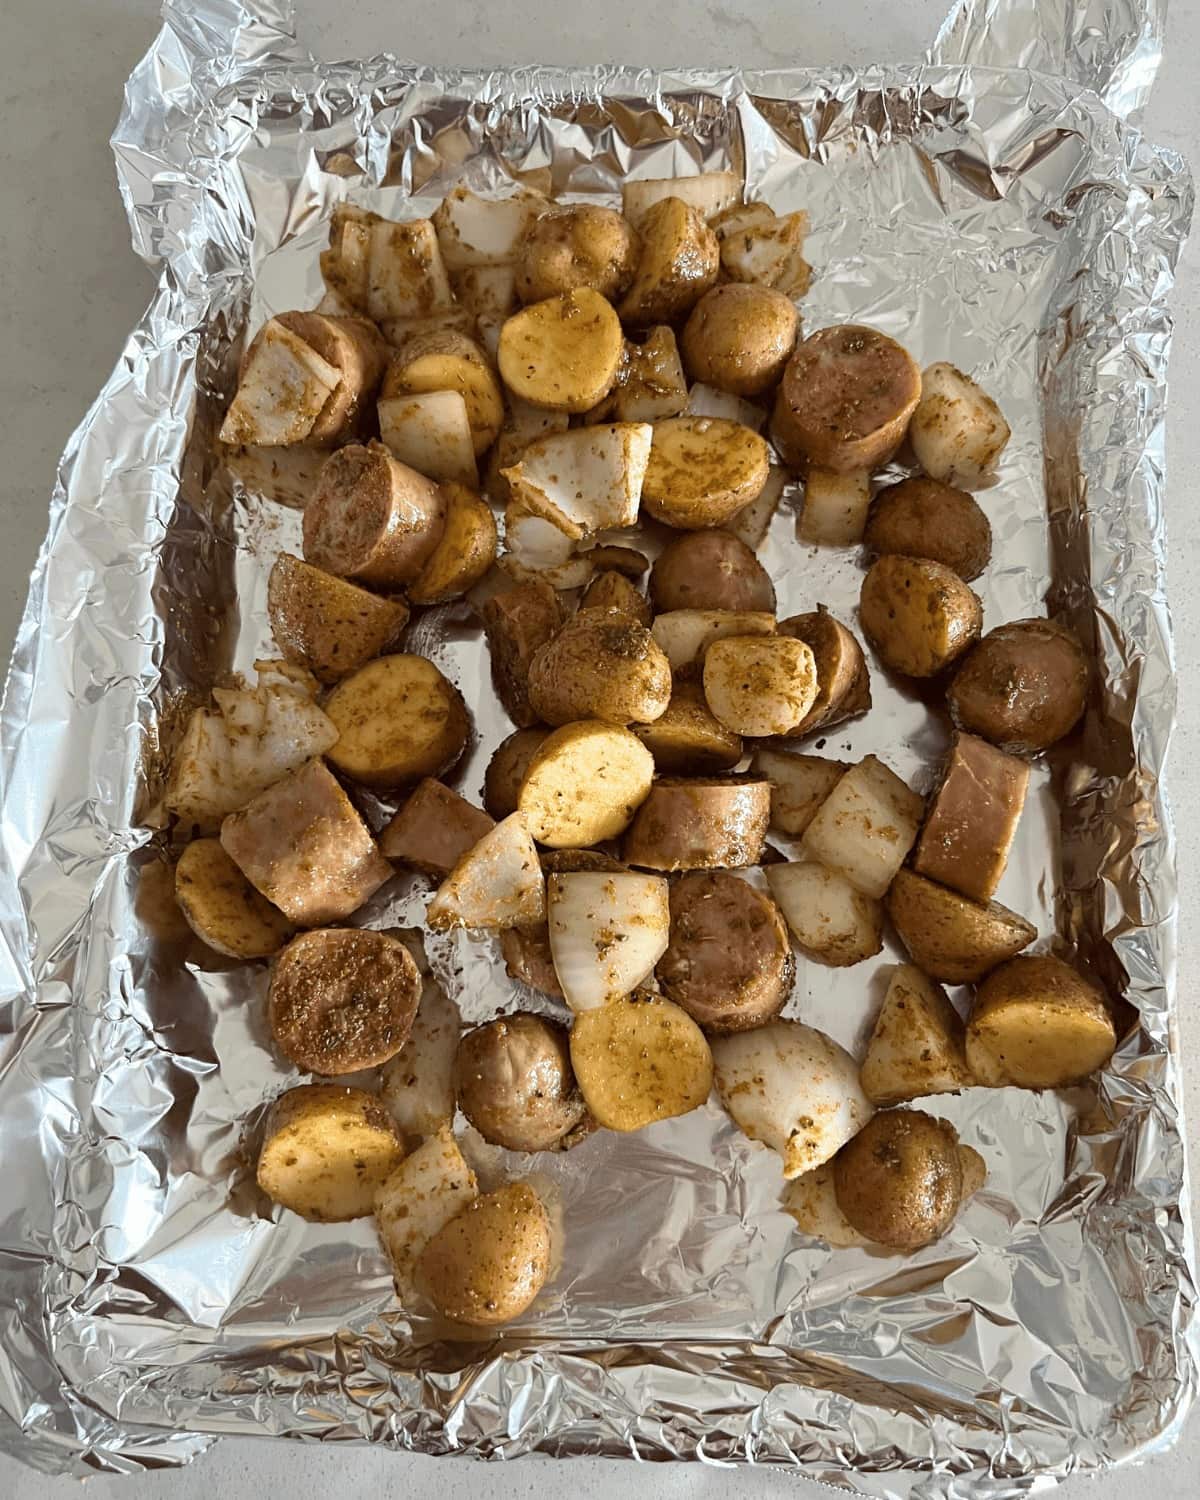 Oven Roasted Smoked Sausage and Potatoes with Spicy Seasonings